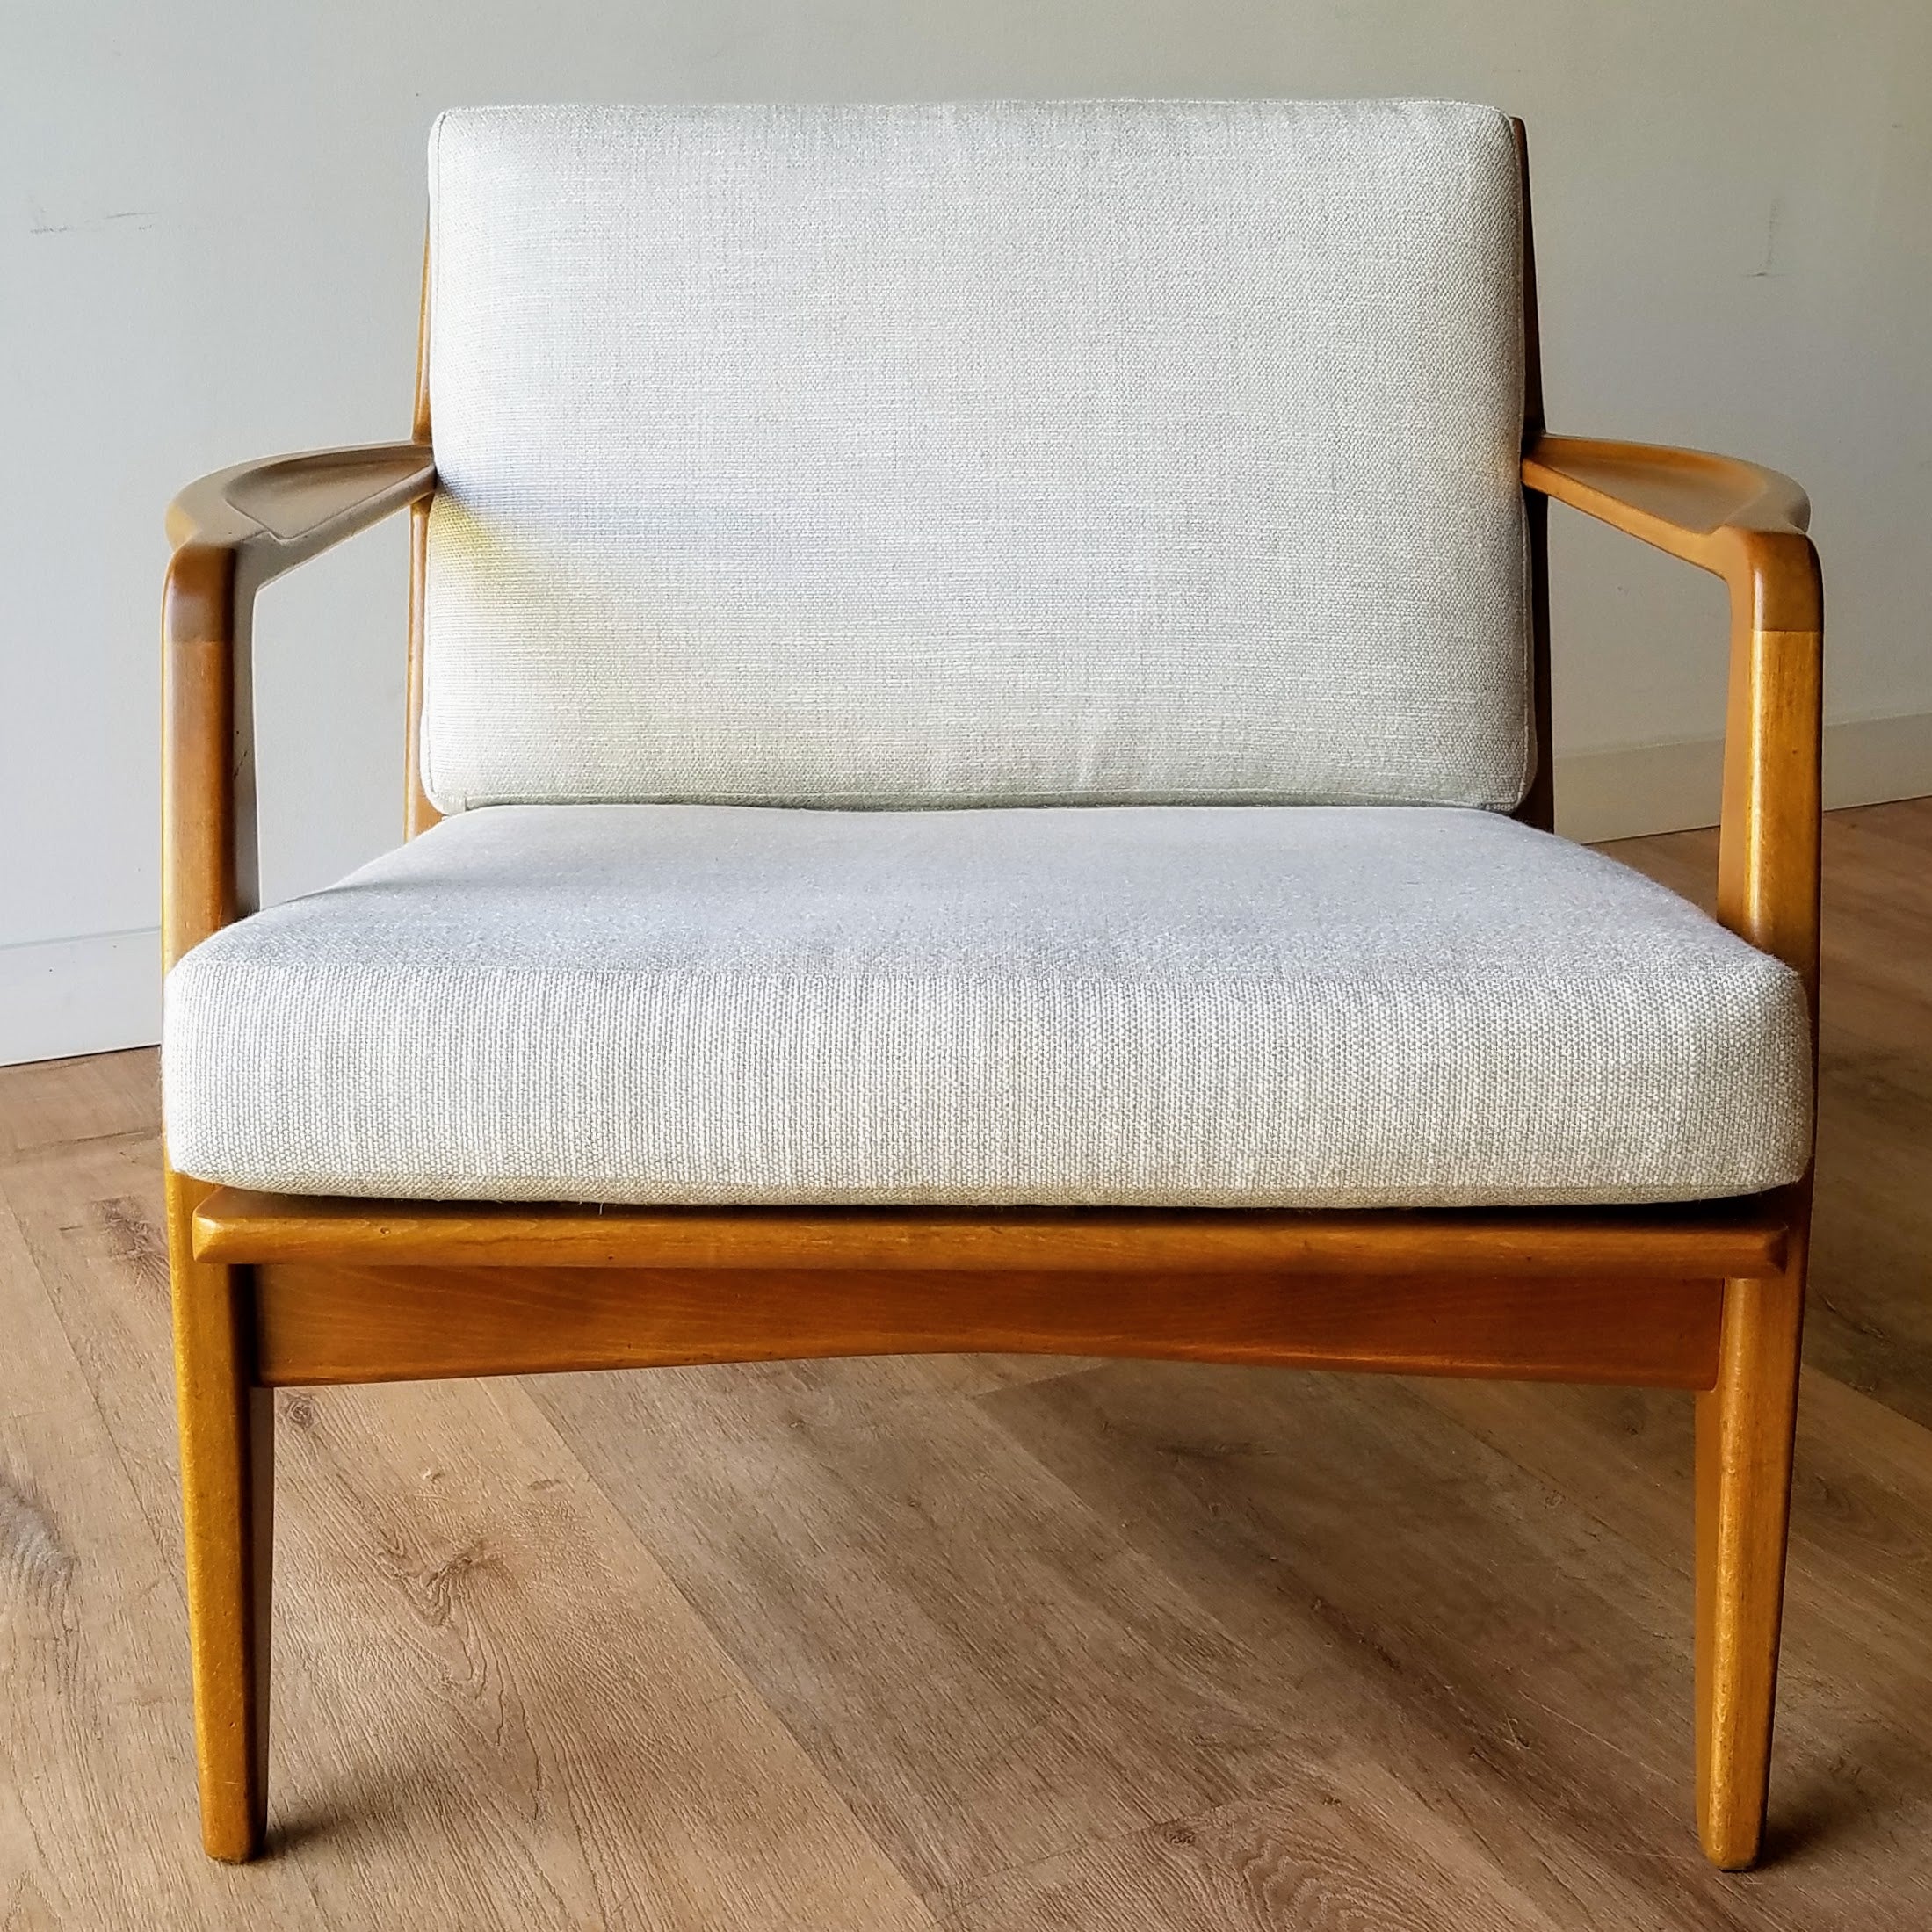 Lawrence Peaboy Lounge Chair